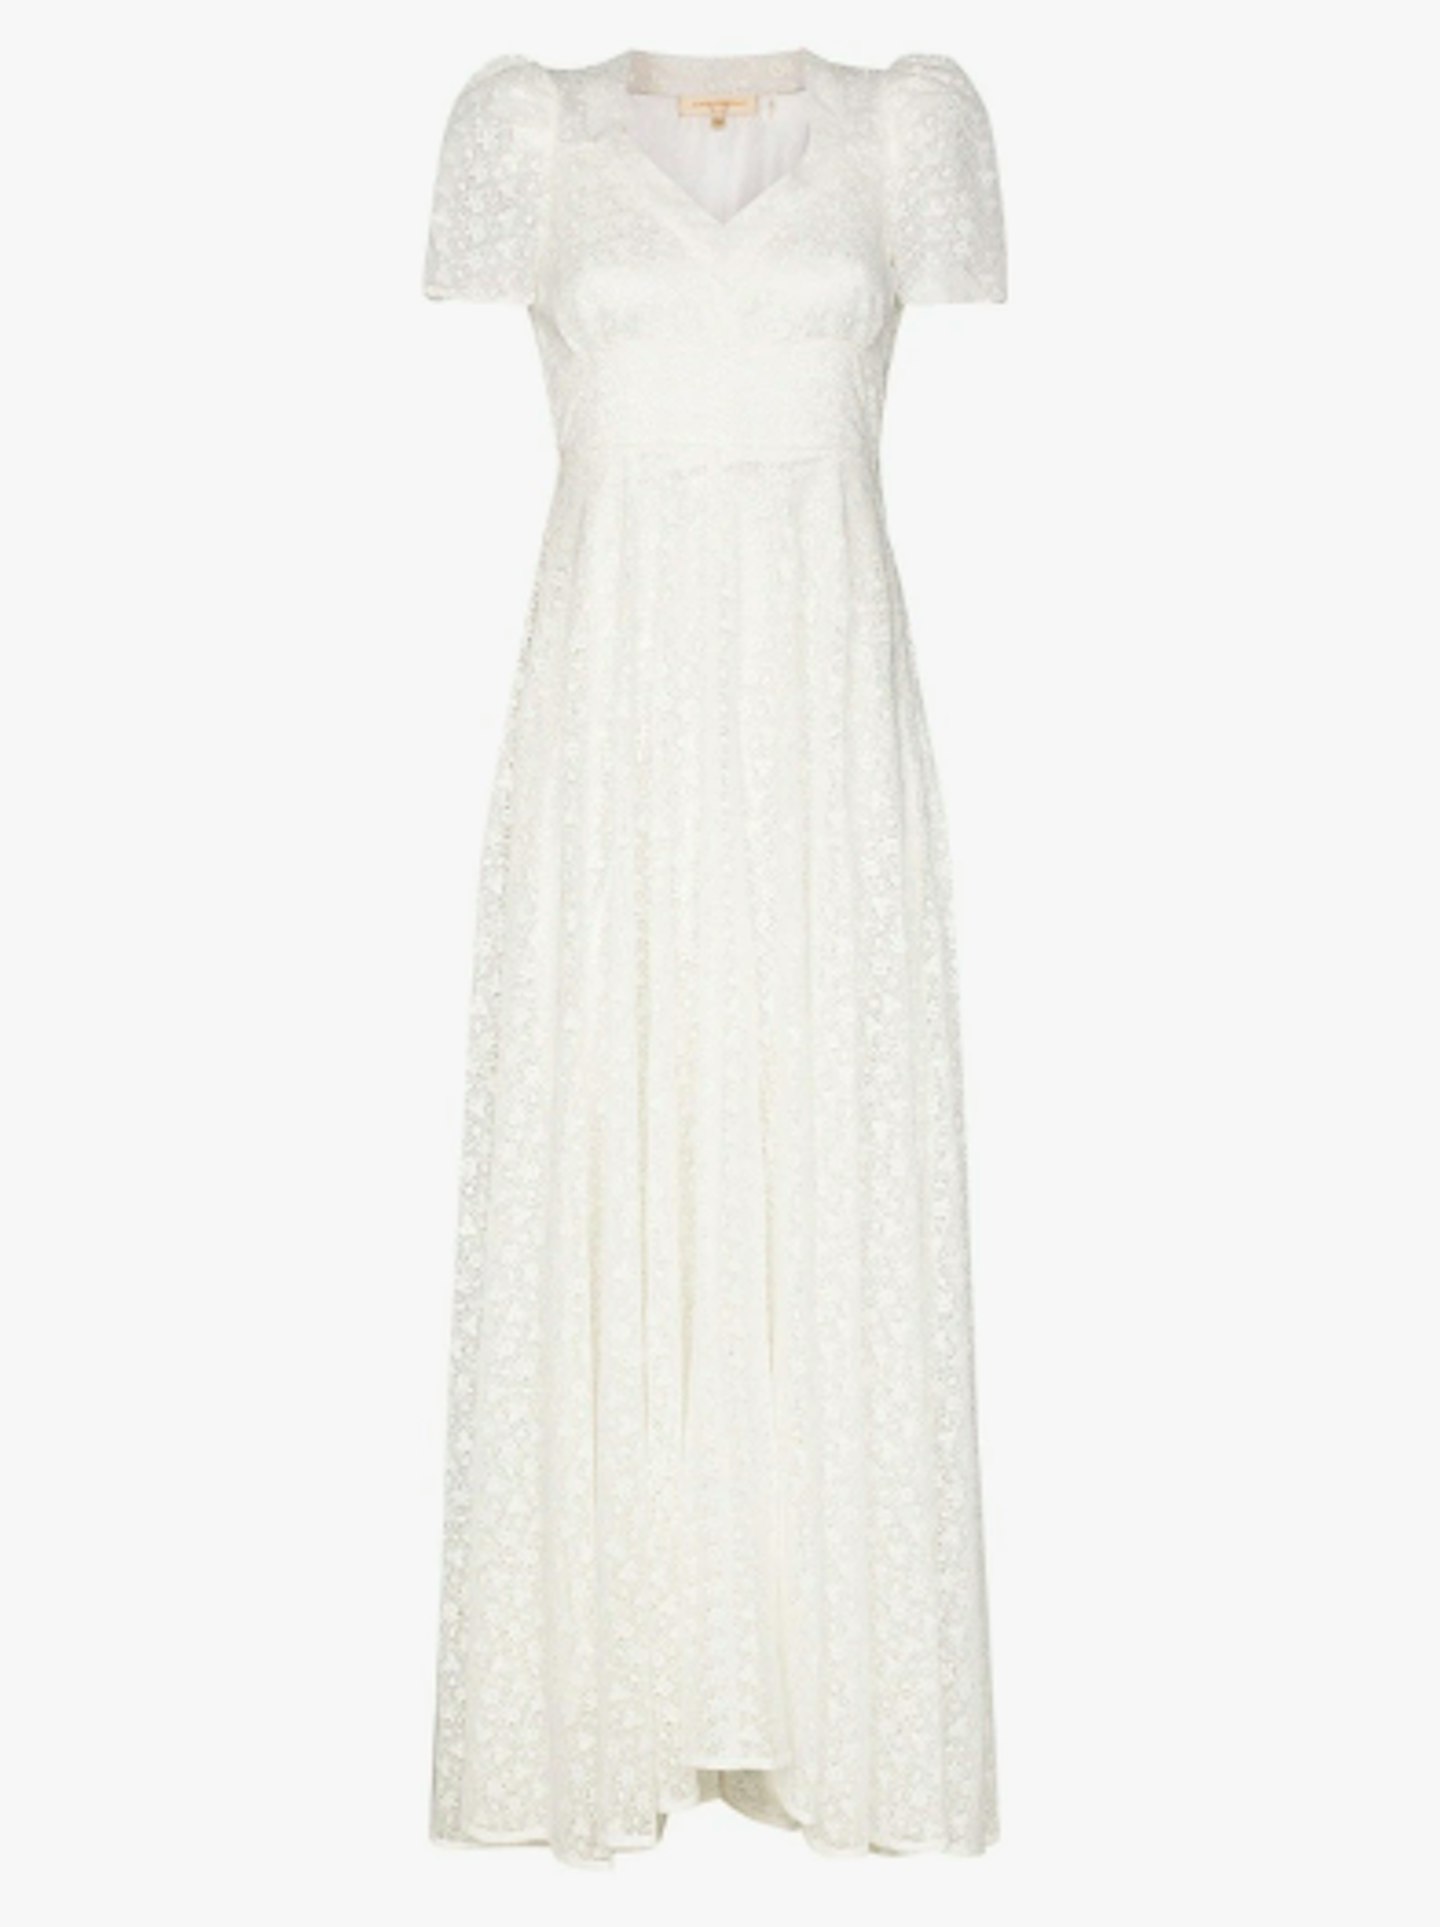 LoveShackFancy, Embroidered Lace Dress, £690